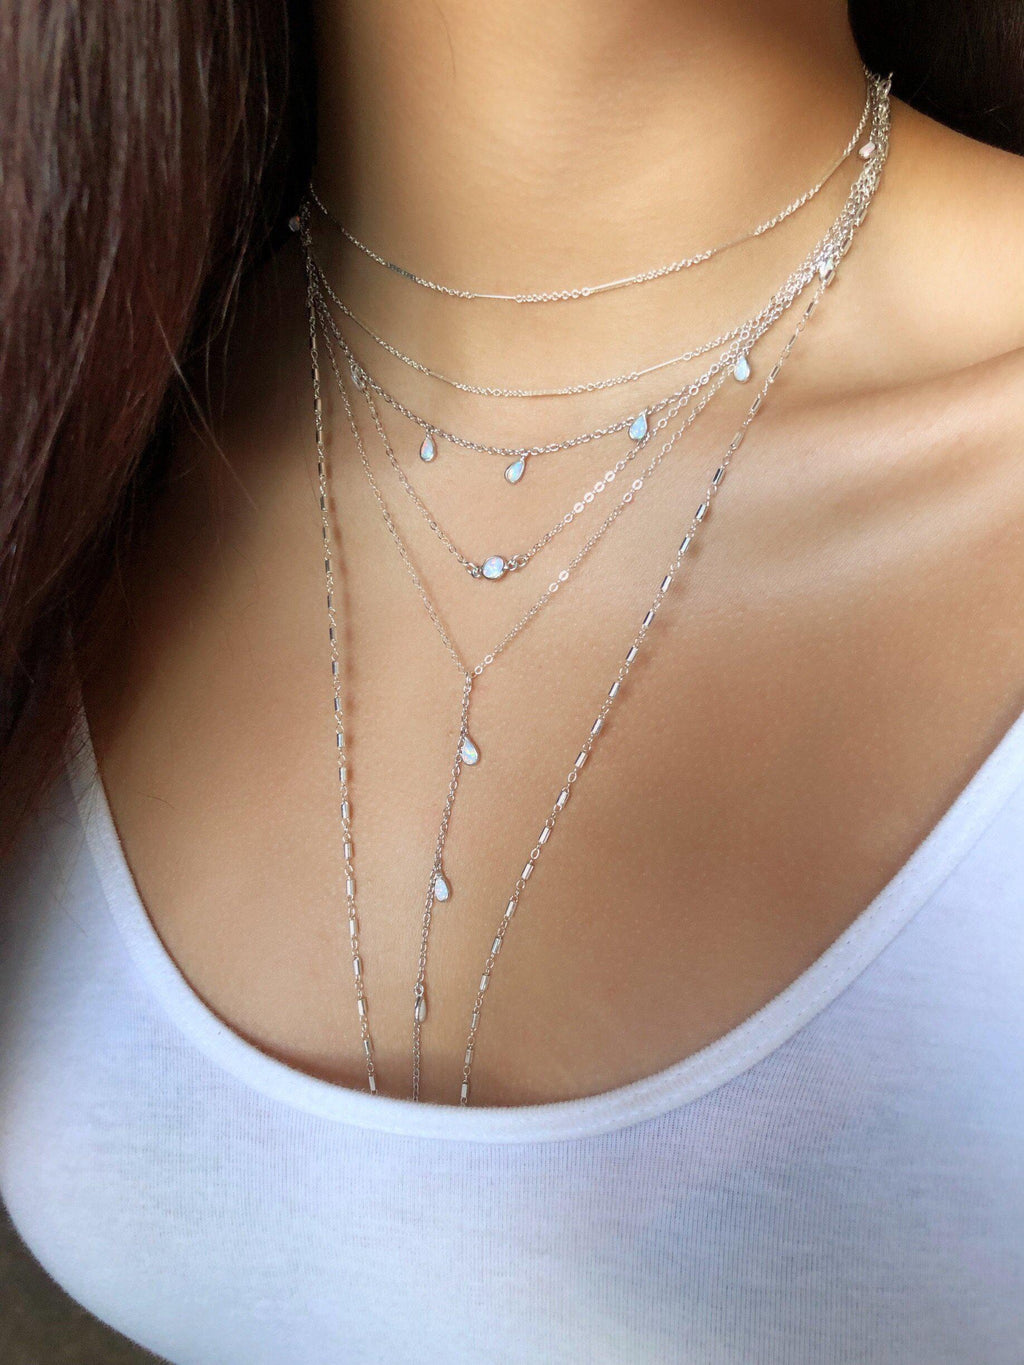 Opal Solitaire Necklace in Silver-Necklaces-Waffles & Honey Jewelry-Waffles & Honey Jewelry